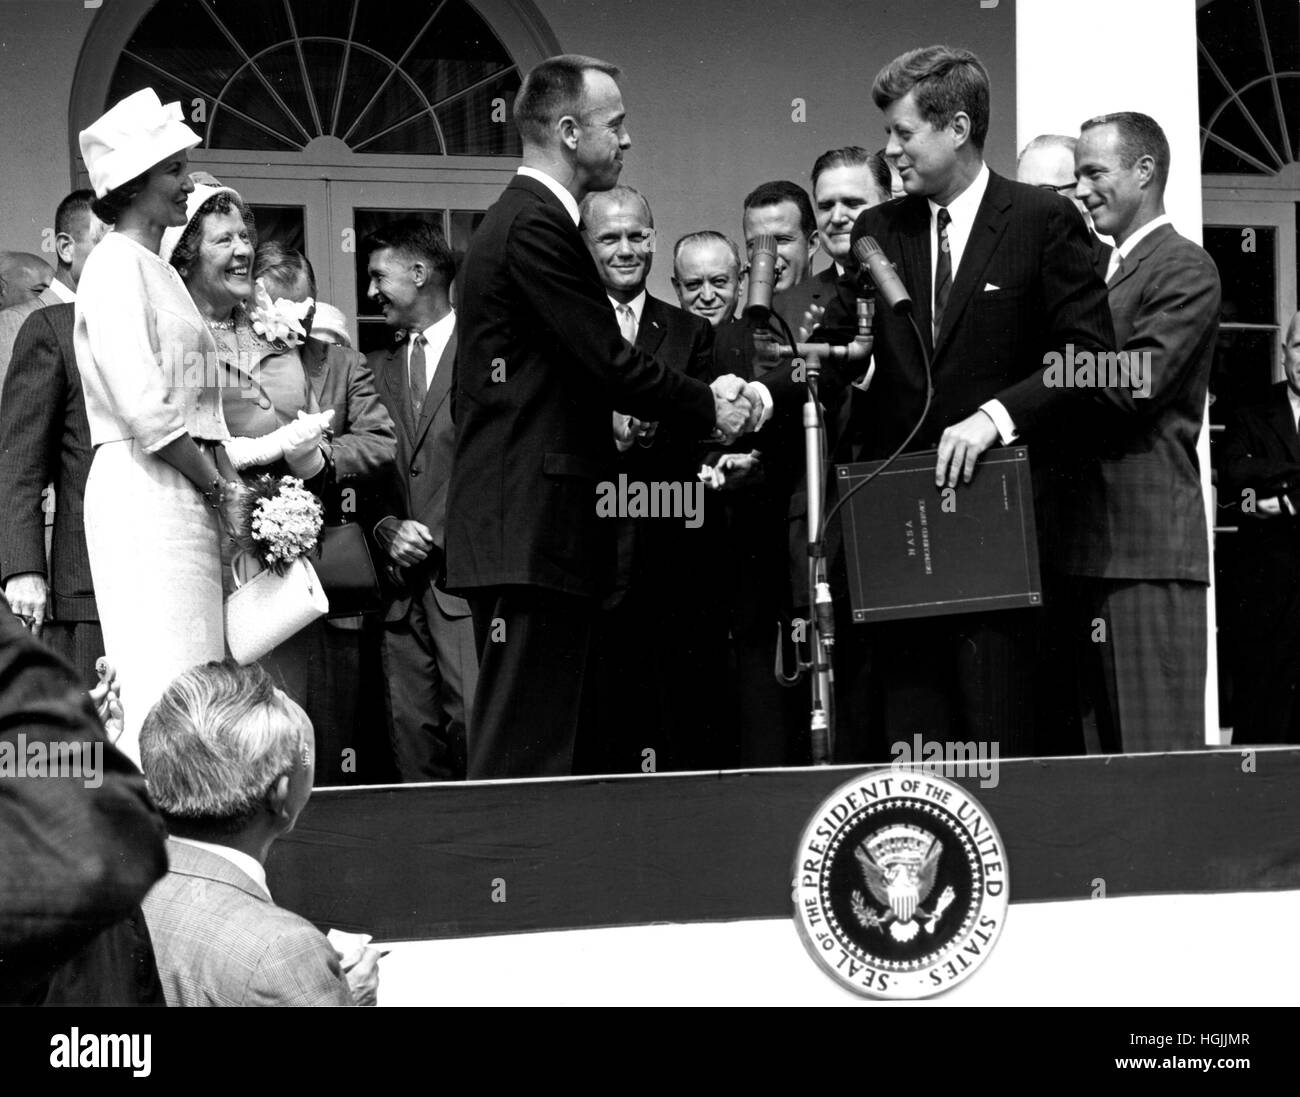 United States President John F. Kennedy congratulates astronaut Alan B. Shepard, Jr., the first American in space, on his historic May 5th, 1961 ride in the Freedom 7 spacecraft and presents him with the National Aeronautics and Space Administration (NASA) Distinguished Service Award, in Washington, DC on May 6, 1961. Shepard's wife, Louise (left in white dress and hat), and his mother were in attendance as well as the other six Mercury astronauts, including Colonel John H. Glenn, Jr. and other NASA officals, some visible in the background.Credit: NASA via CNP - NO WIRE SERVICE - Photo: N Stock Photo